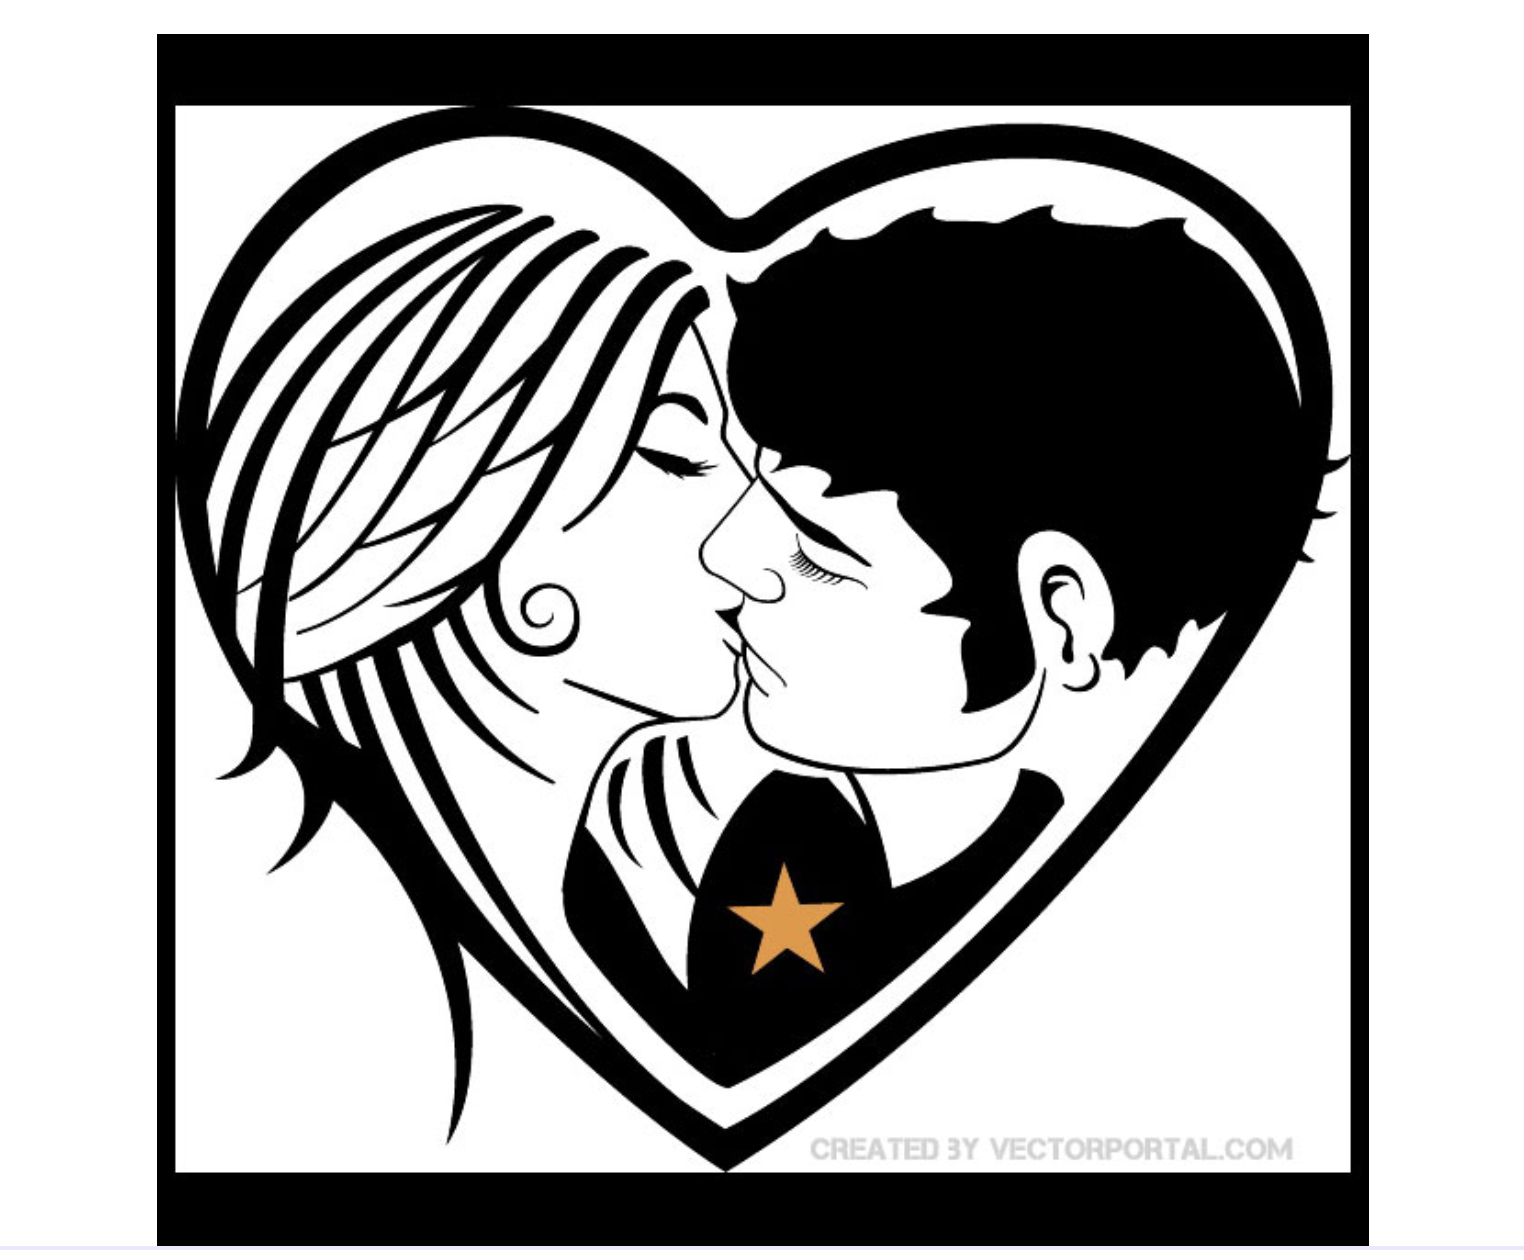 Illustration of a couple kissing